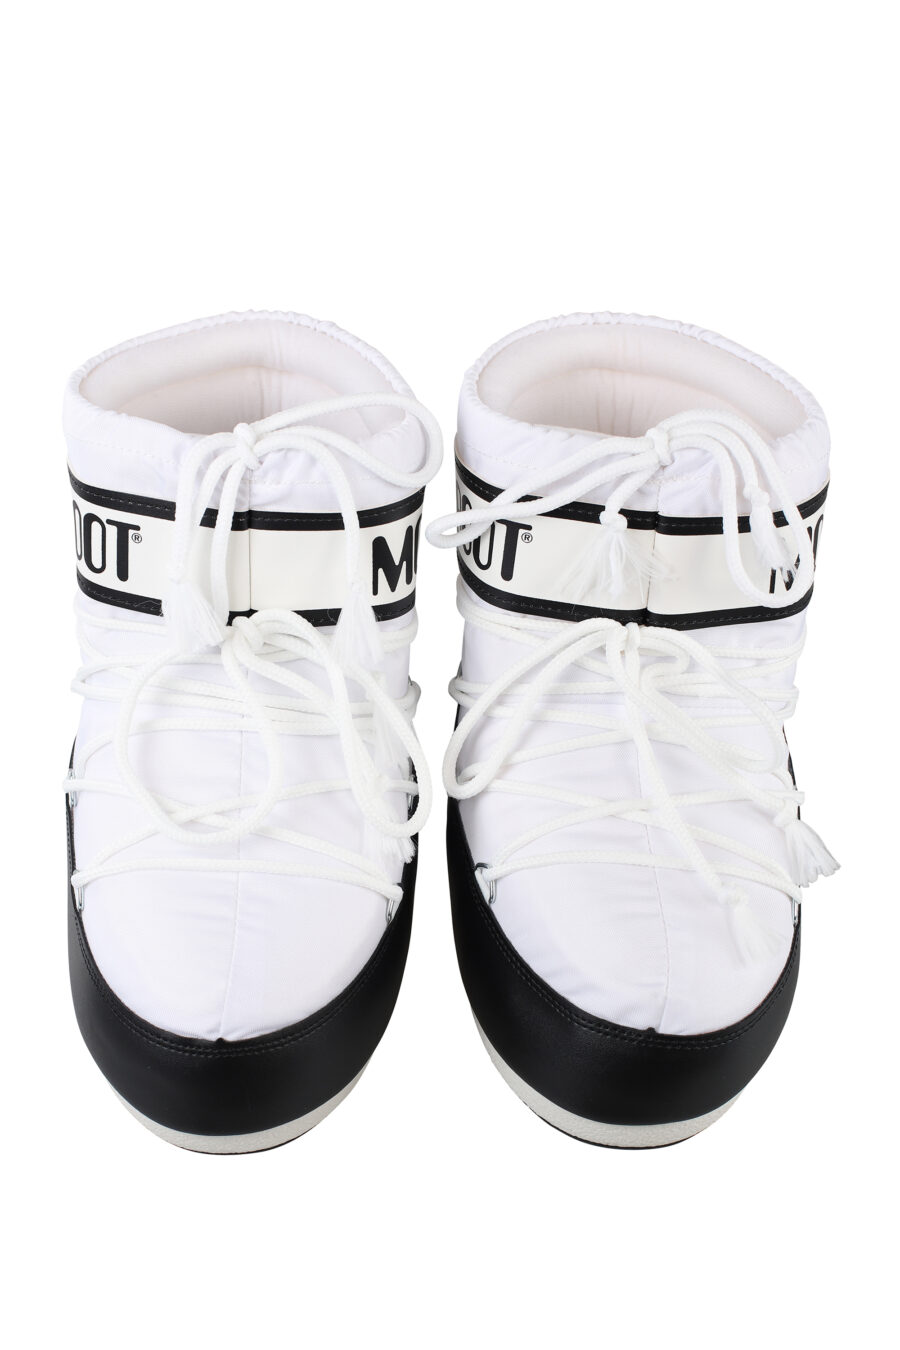 Two-tone black and white snow boots with black logo - IMG 6703